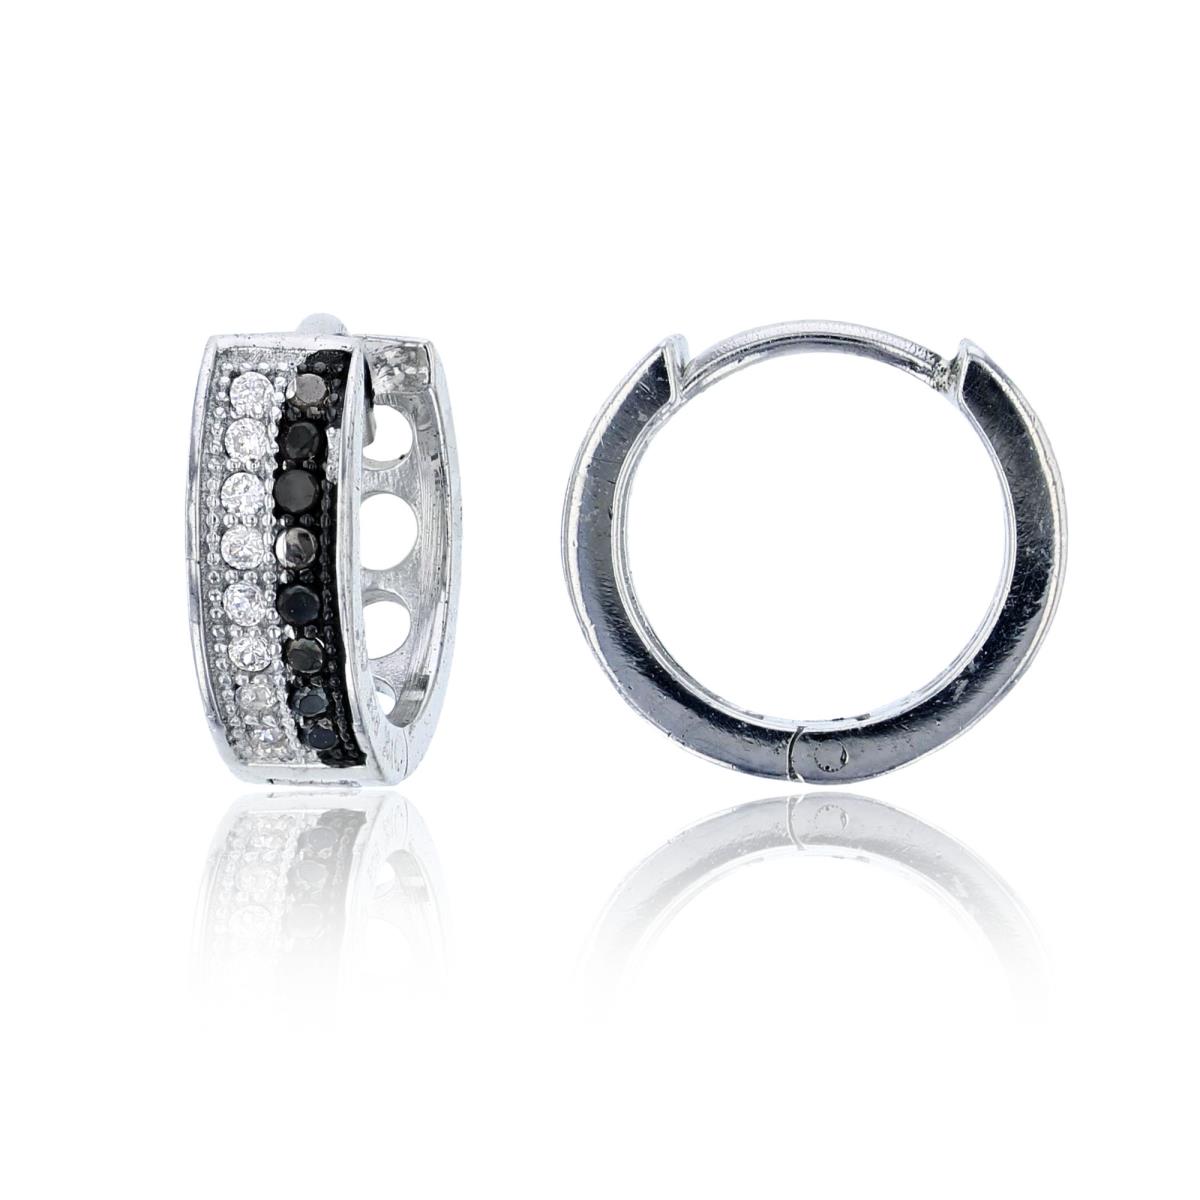 Sterling Silver Black & White 2 Row Micropave 3x4.5mm Huggies Earring